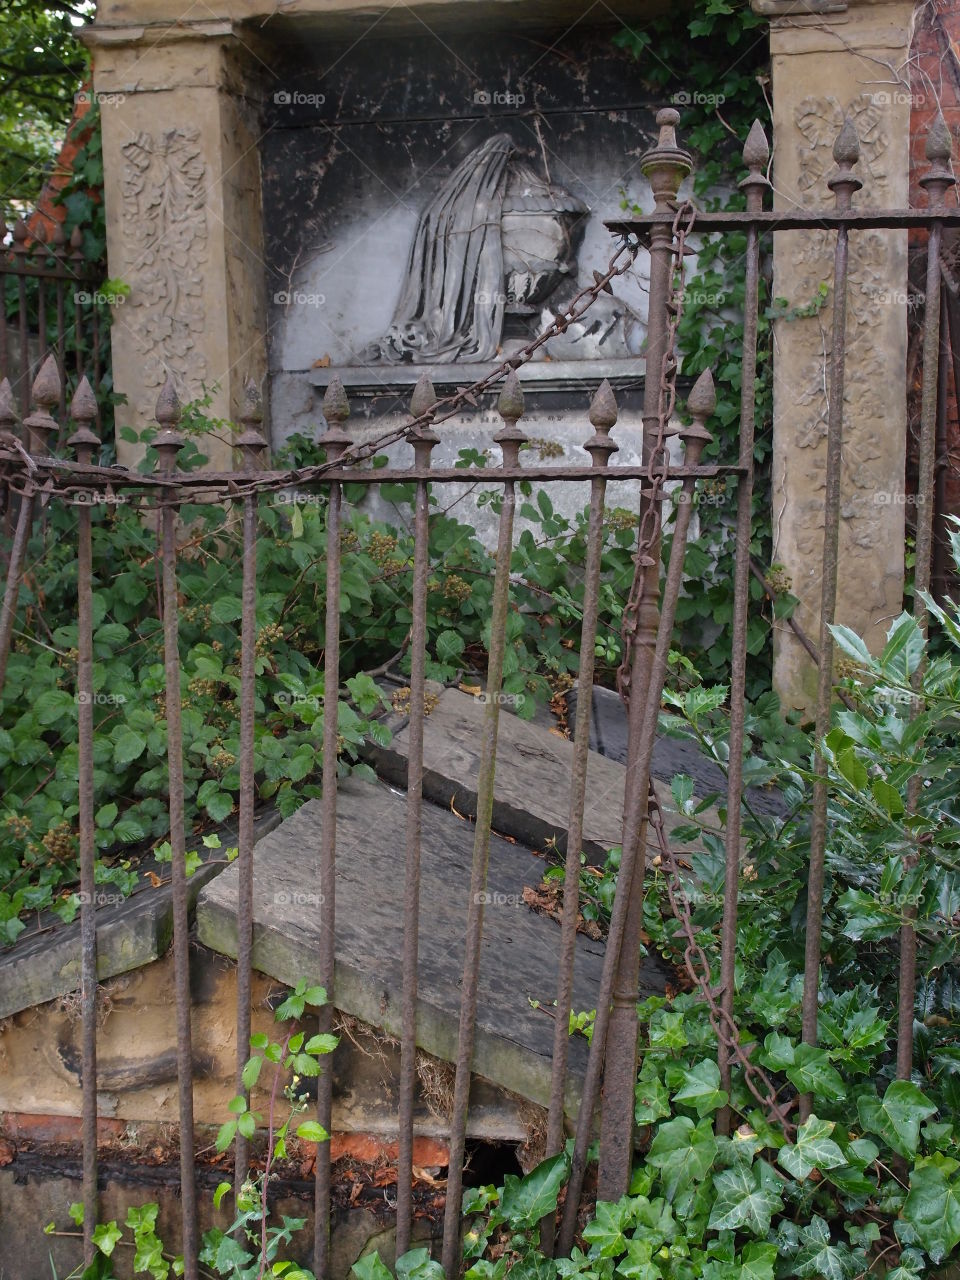 An old European tomb with an iron fence around it, ornate stone carvings, and covered in ivy has withstood the test of time but not without heavy damage. 